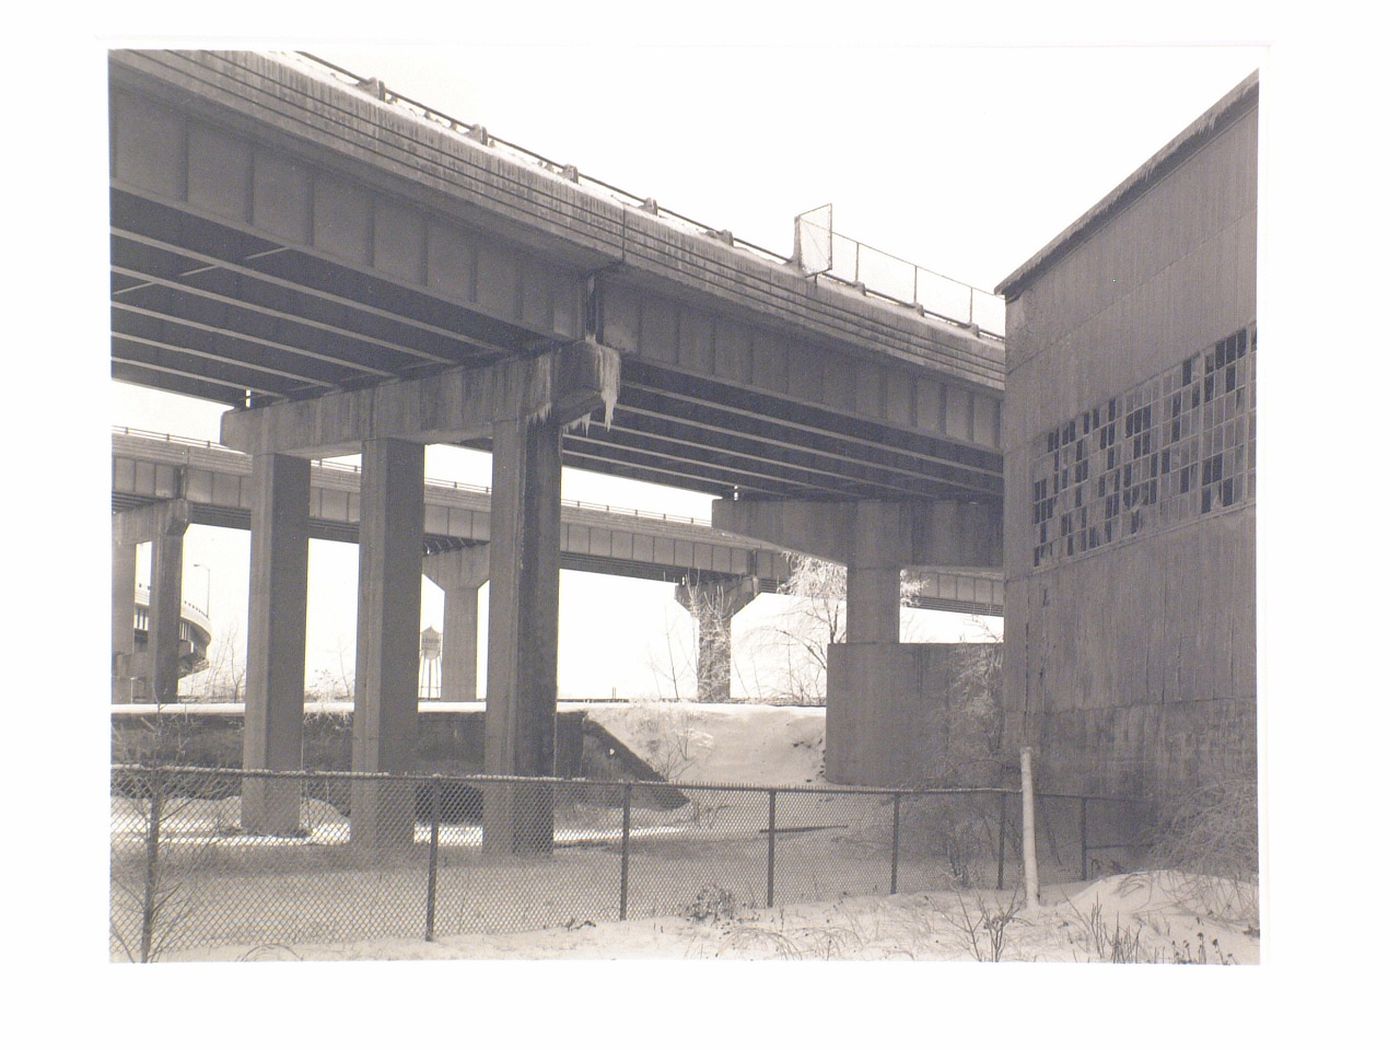 View of elevated concrete highway in snow, Hartford, Connecticut